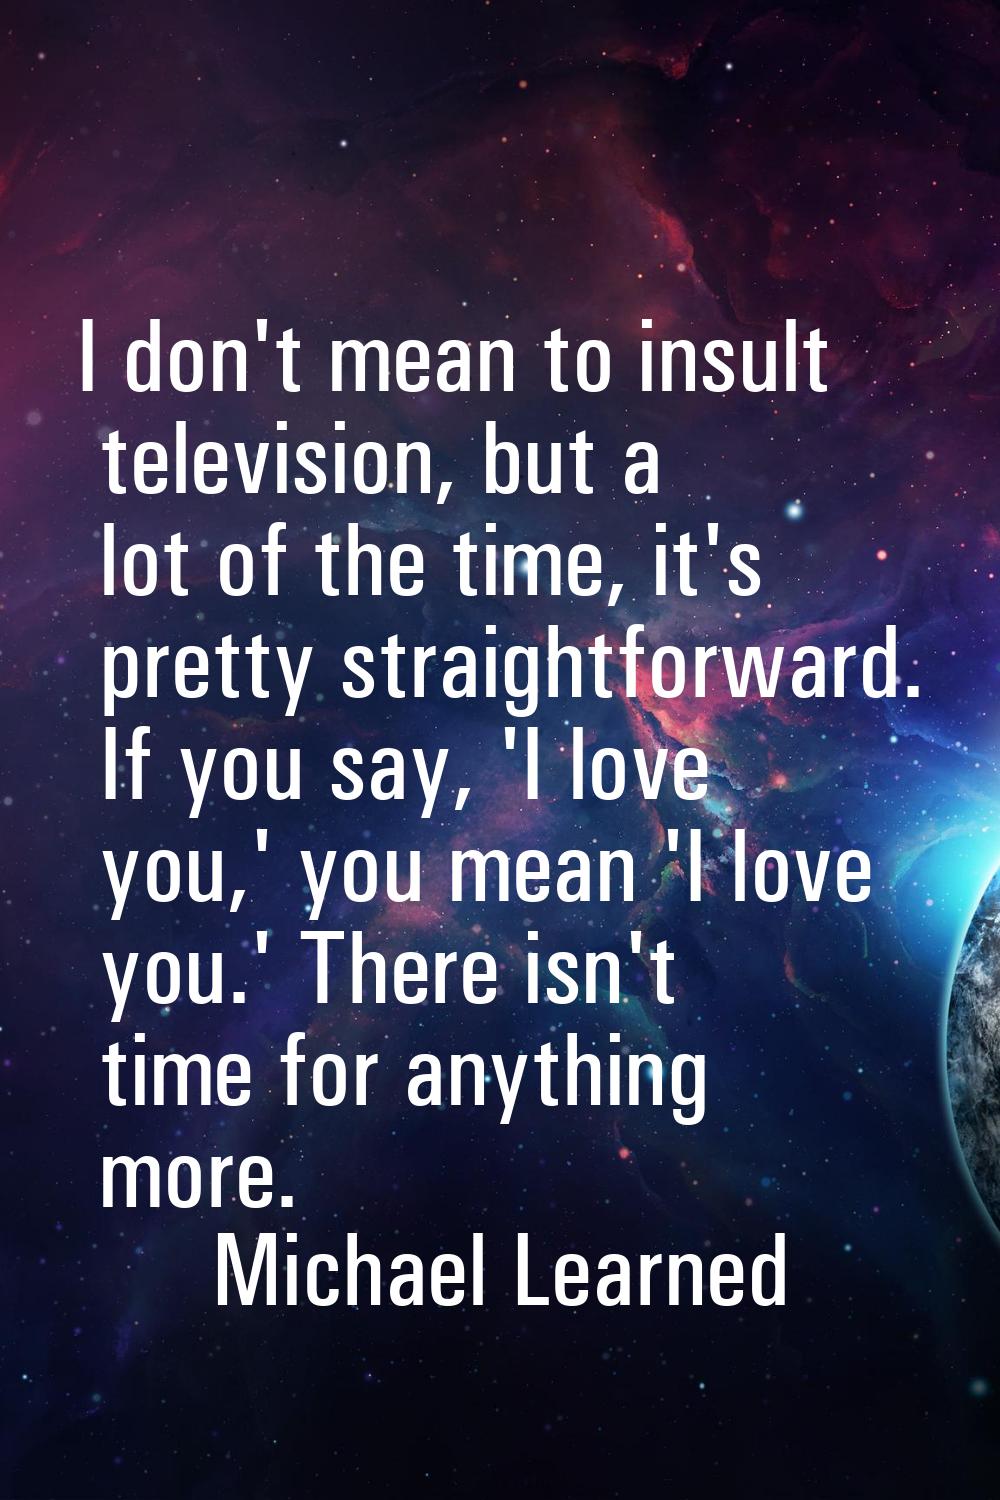 I don't mean to insult television, but a lot of the time, it's pretty straightforward. If you say, 